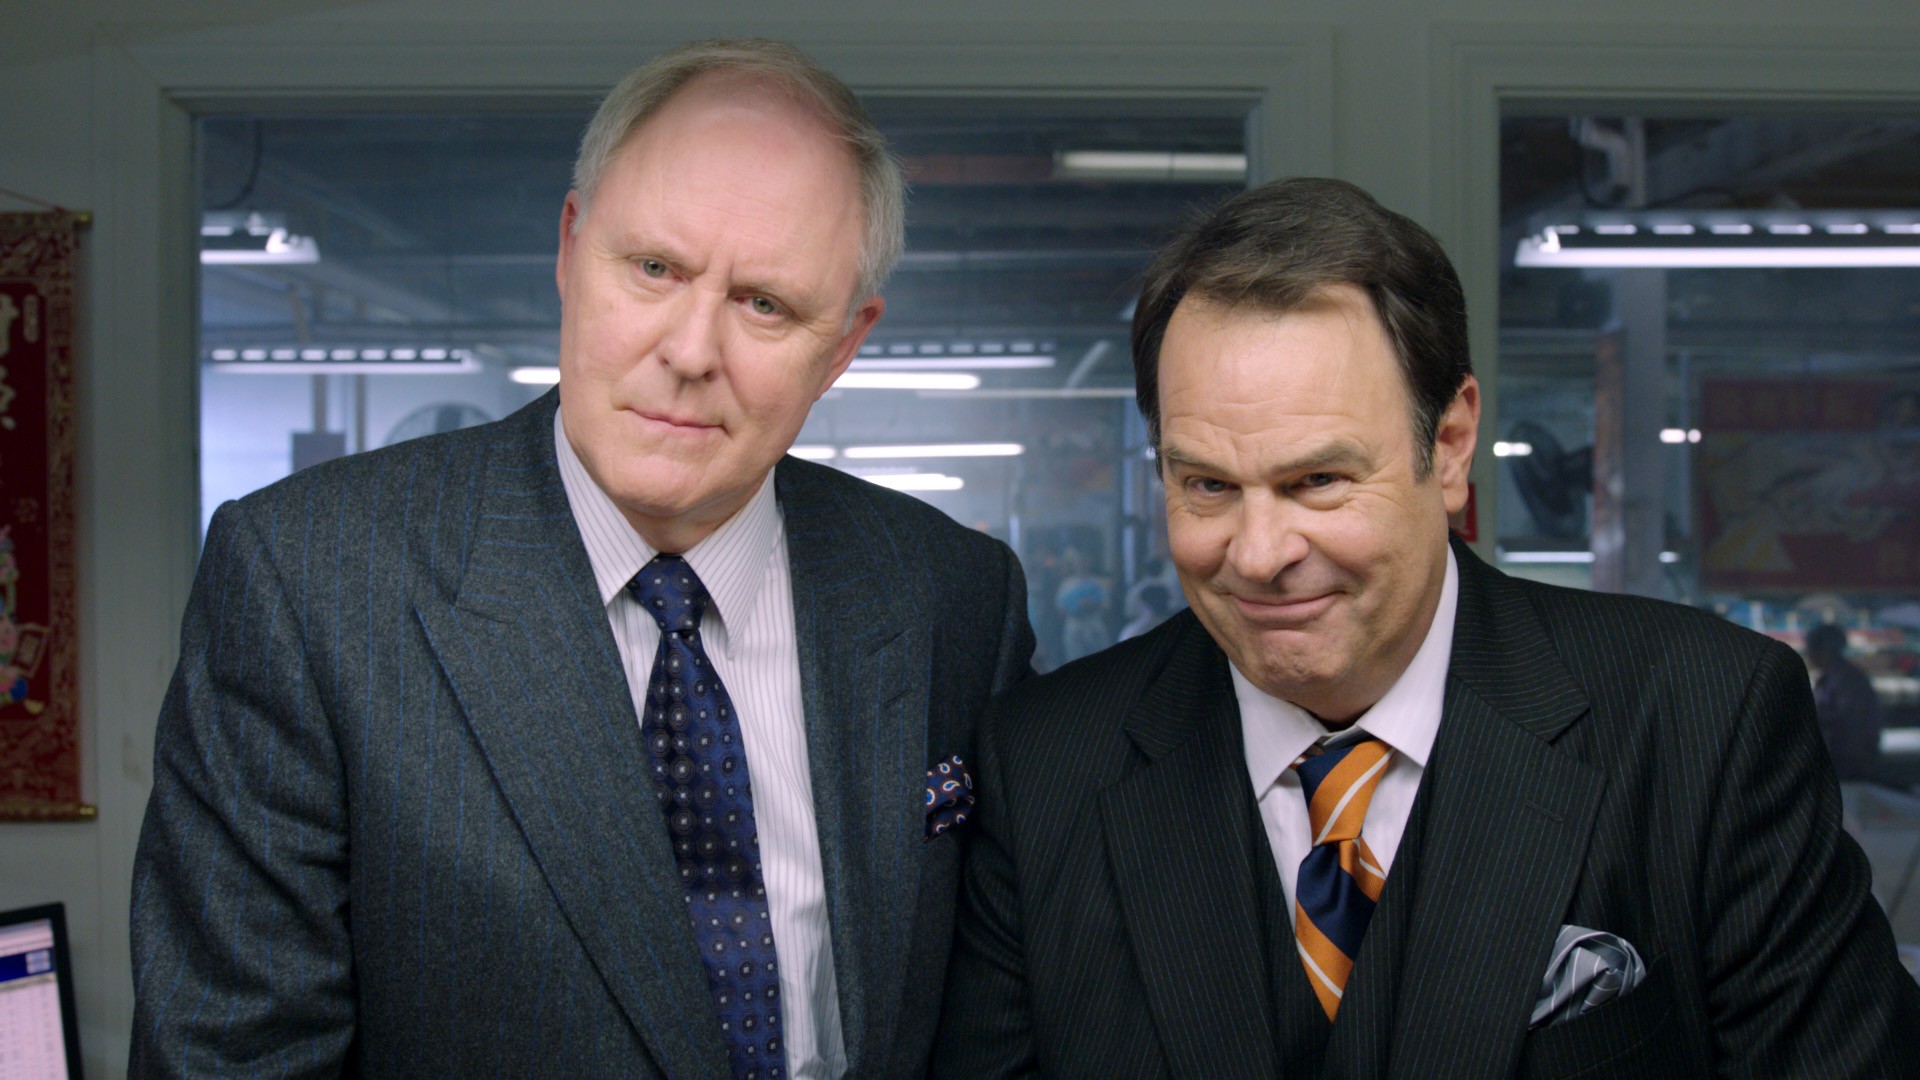 John Lithgow stars as Glen Motch and Dan Aykroyd stars as Wade Motch in Warner Bros. Pictures' The Campaign (2012)